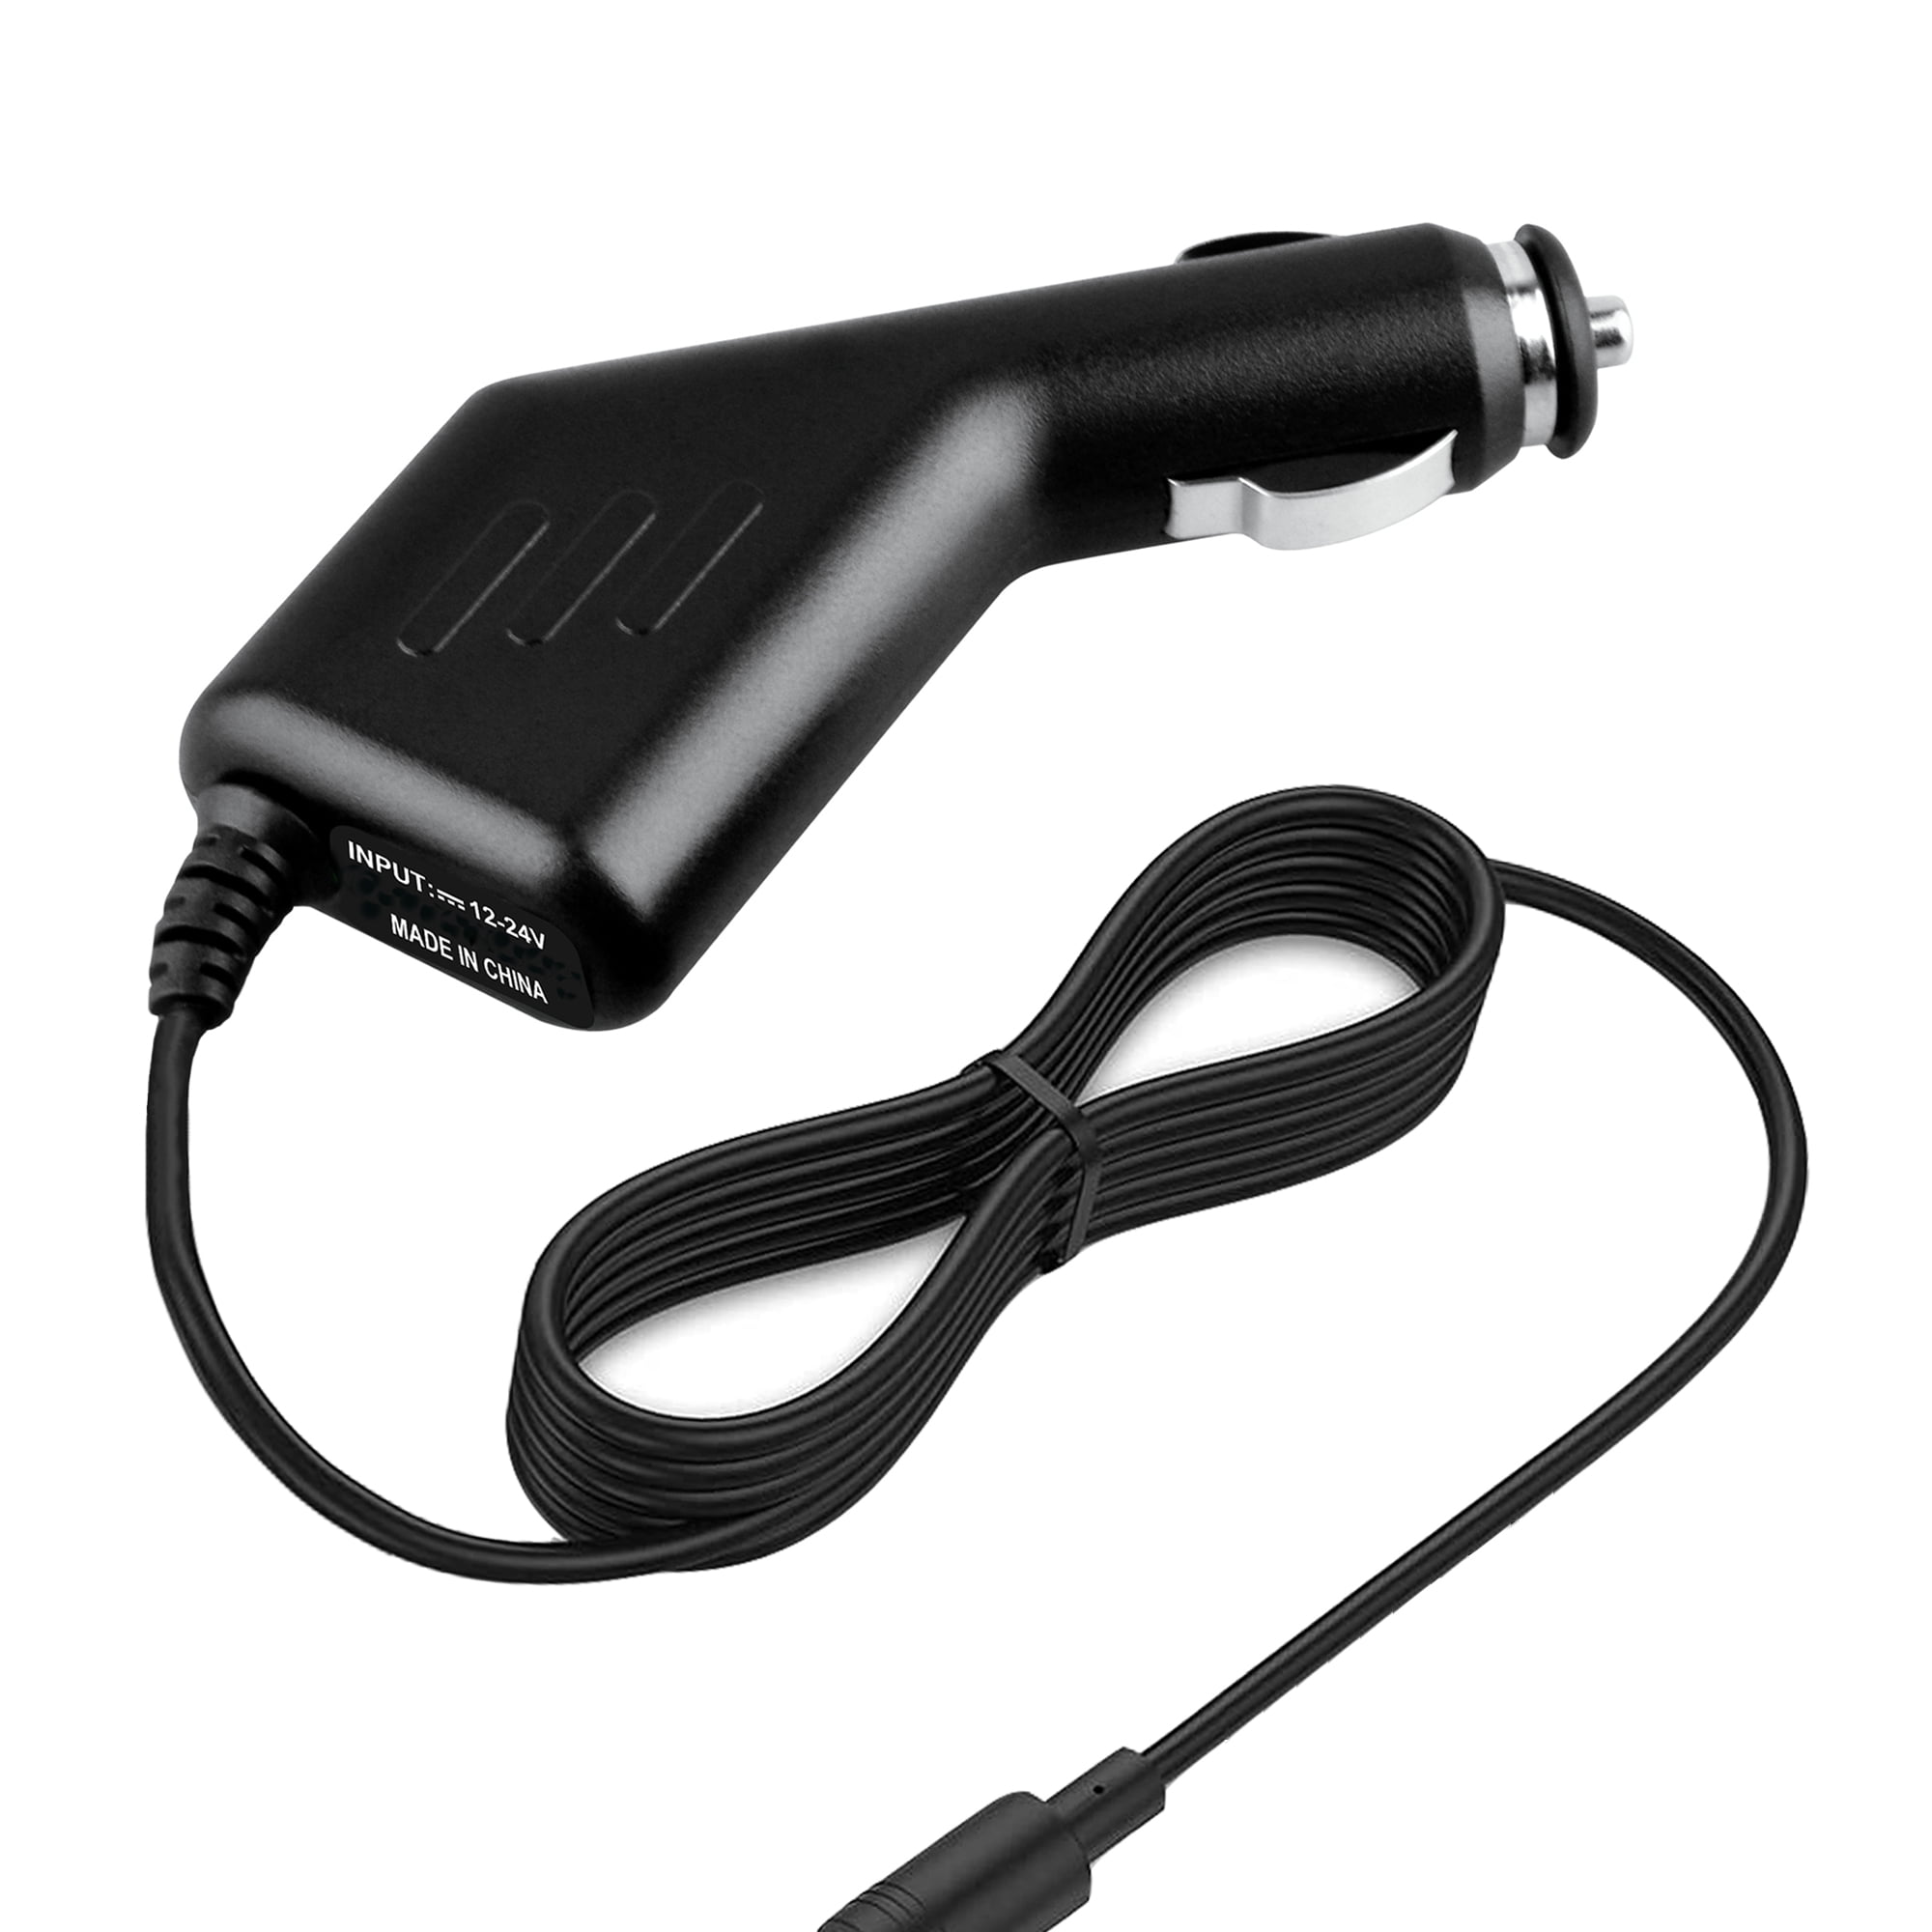 Car Charger for Samsung Galaxy Note 10.1 2014 Edition SM-P600 P601 P605 Tablet 